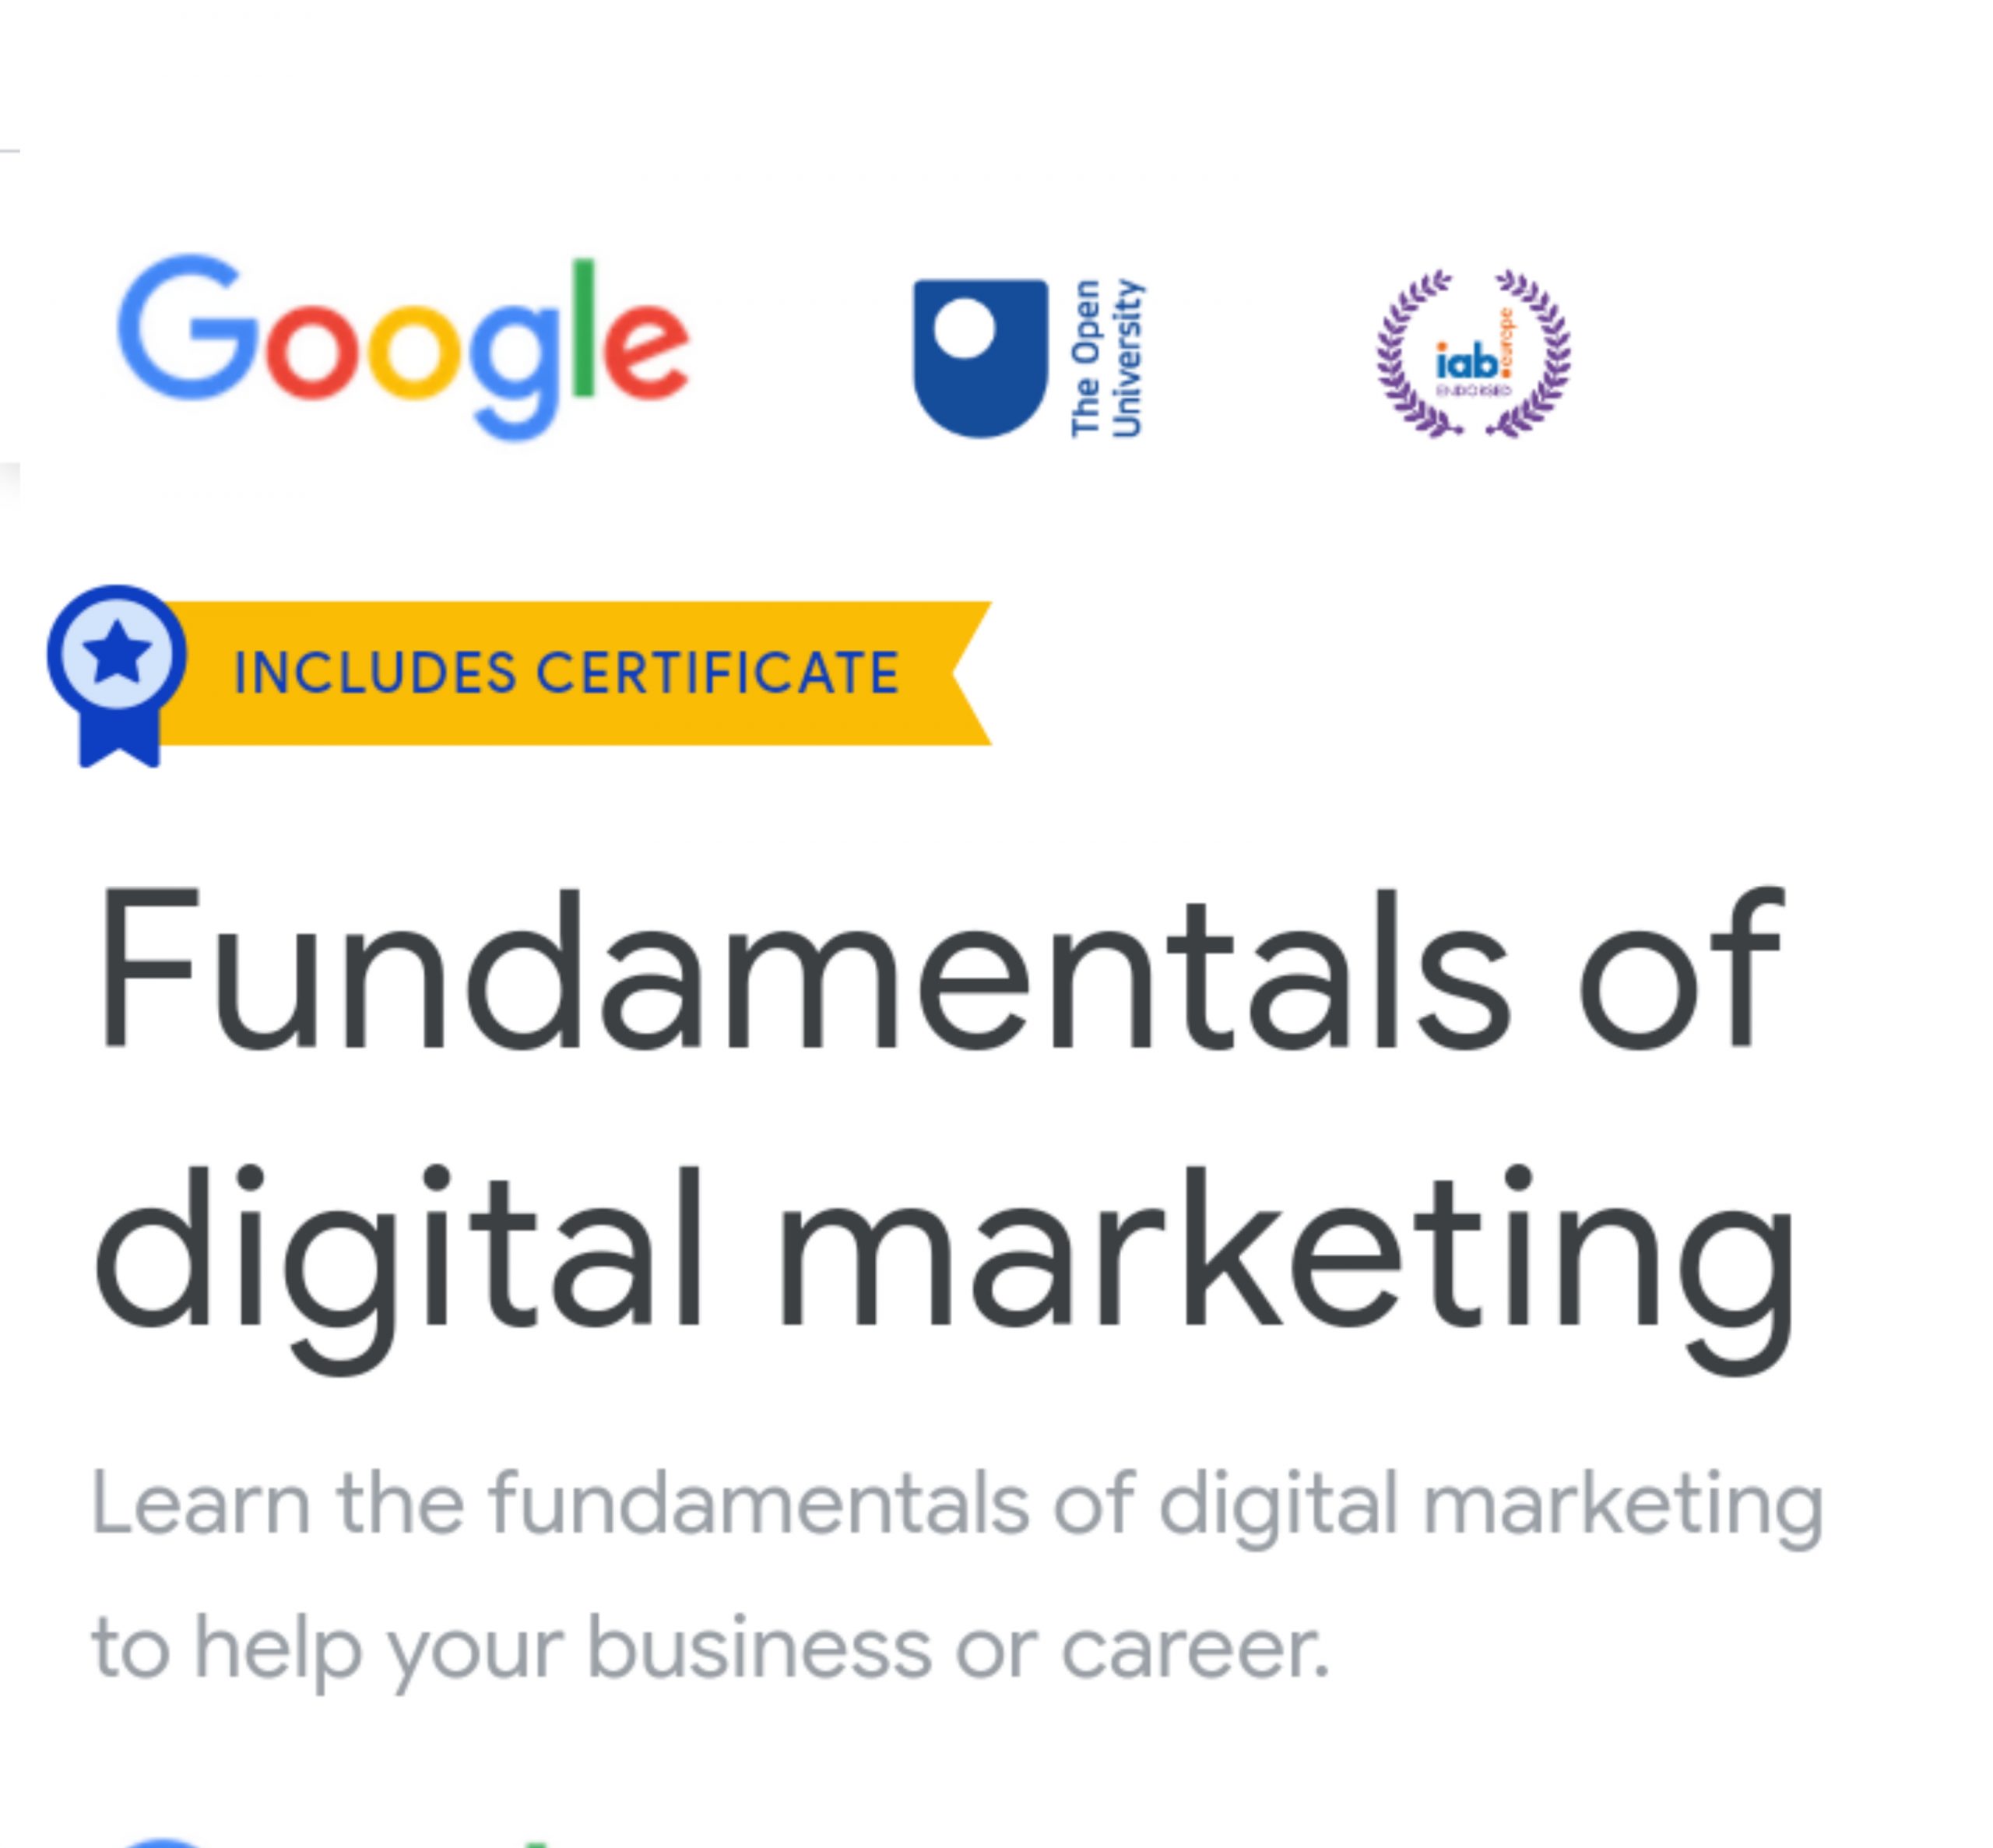 20221009 142239 scaled - Open University and Google Free Digital Marketing Courses With Certificates